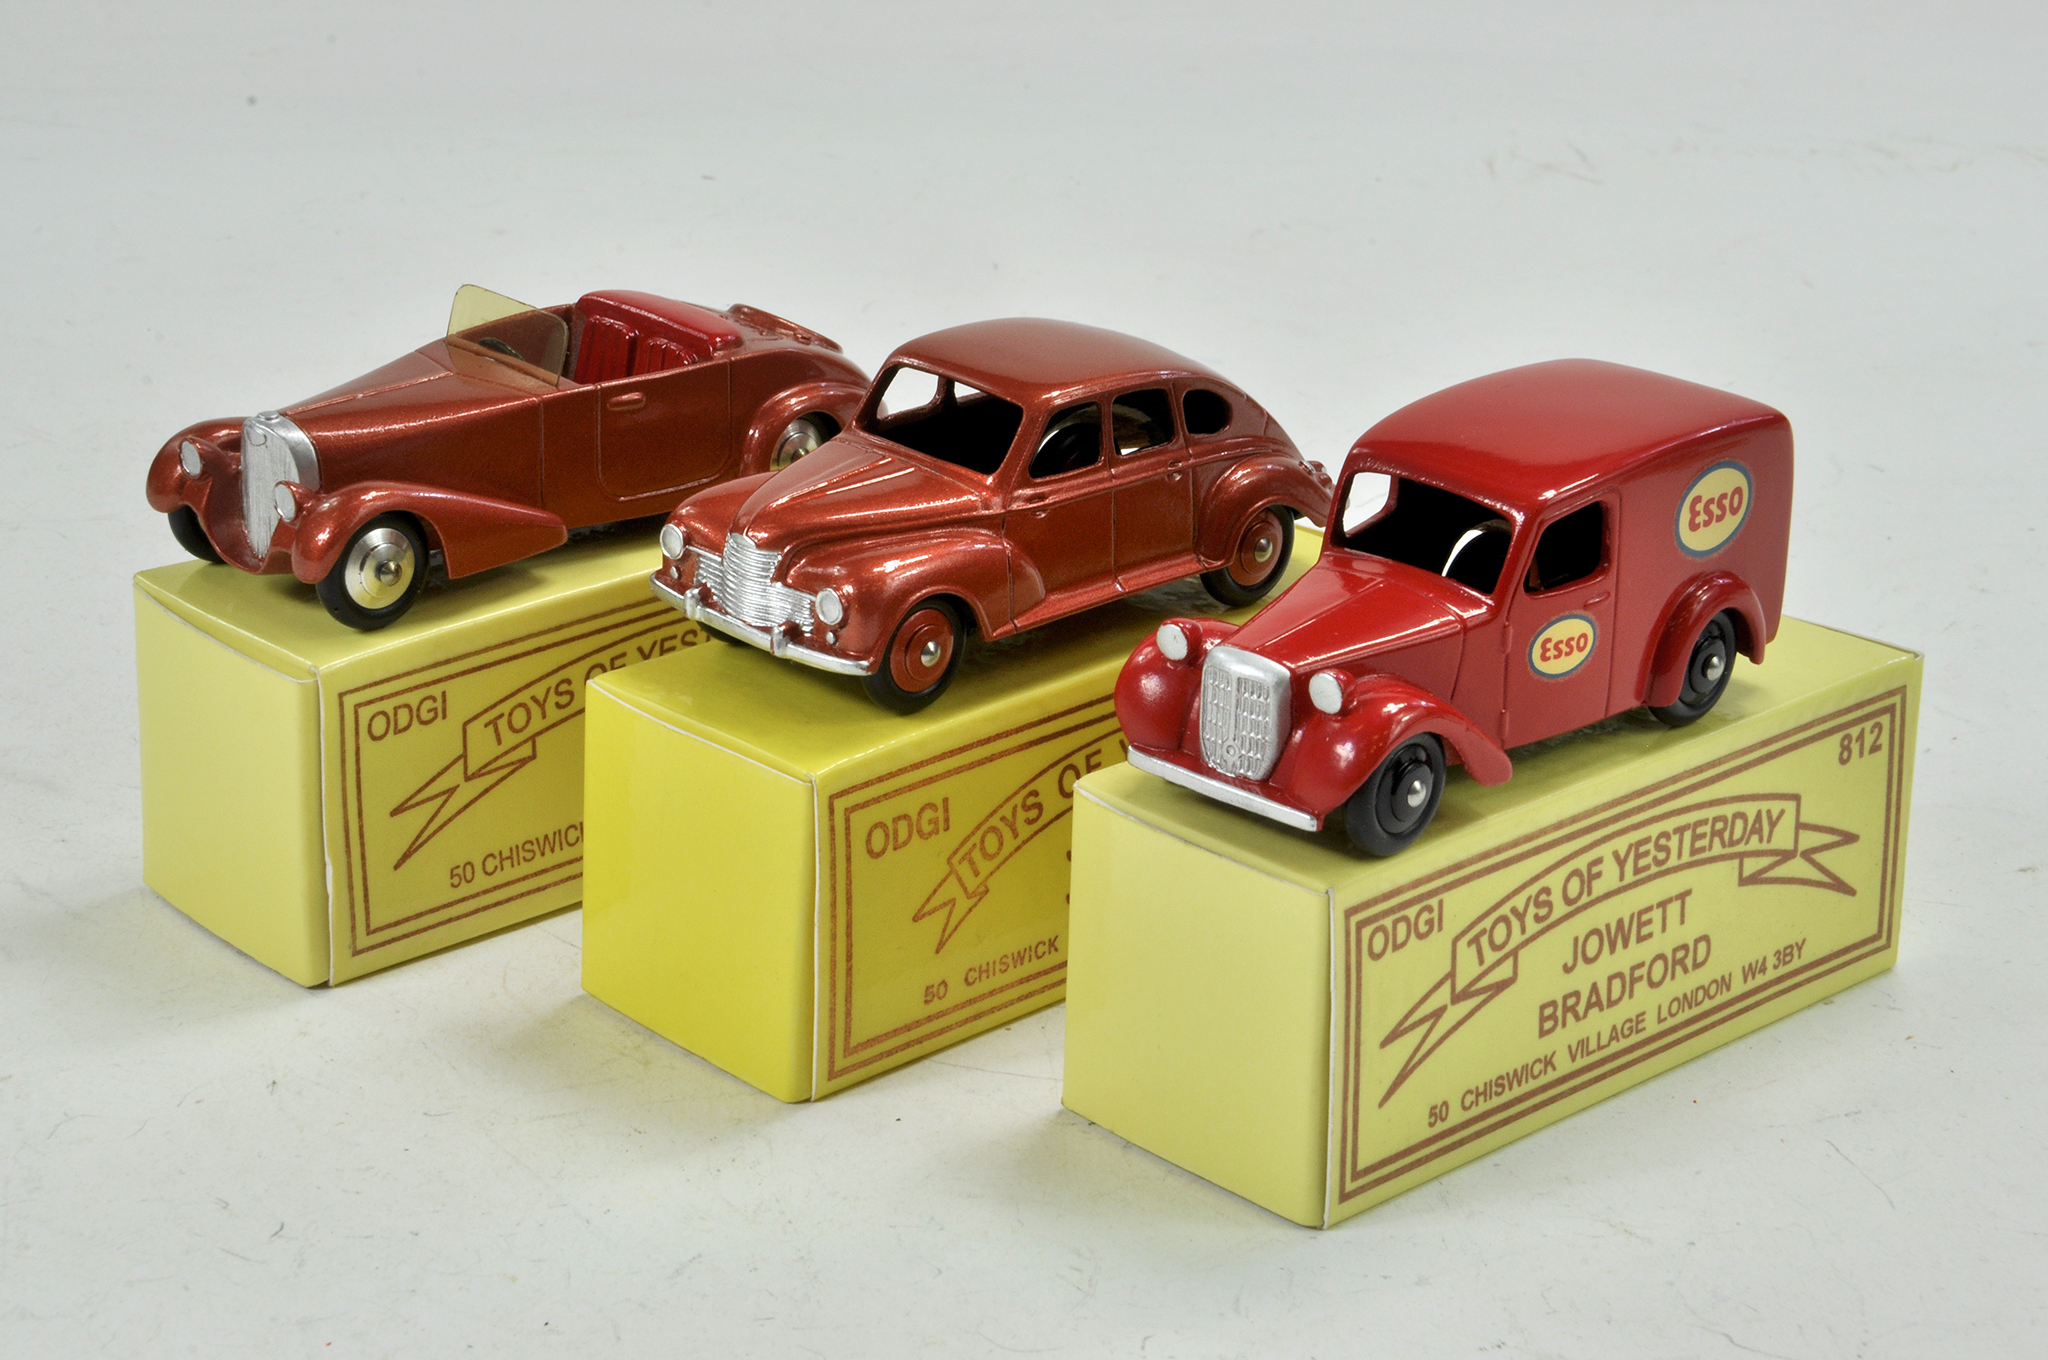 Trio of hard to find ODGI Toys of Yesteryear, comparable to Dinky including Esso delivery van.